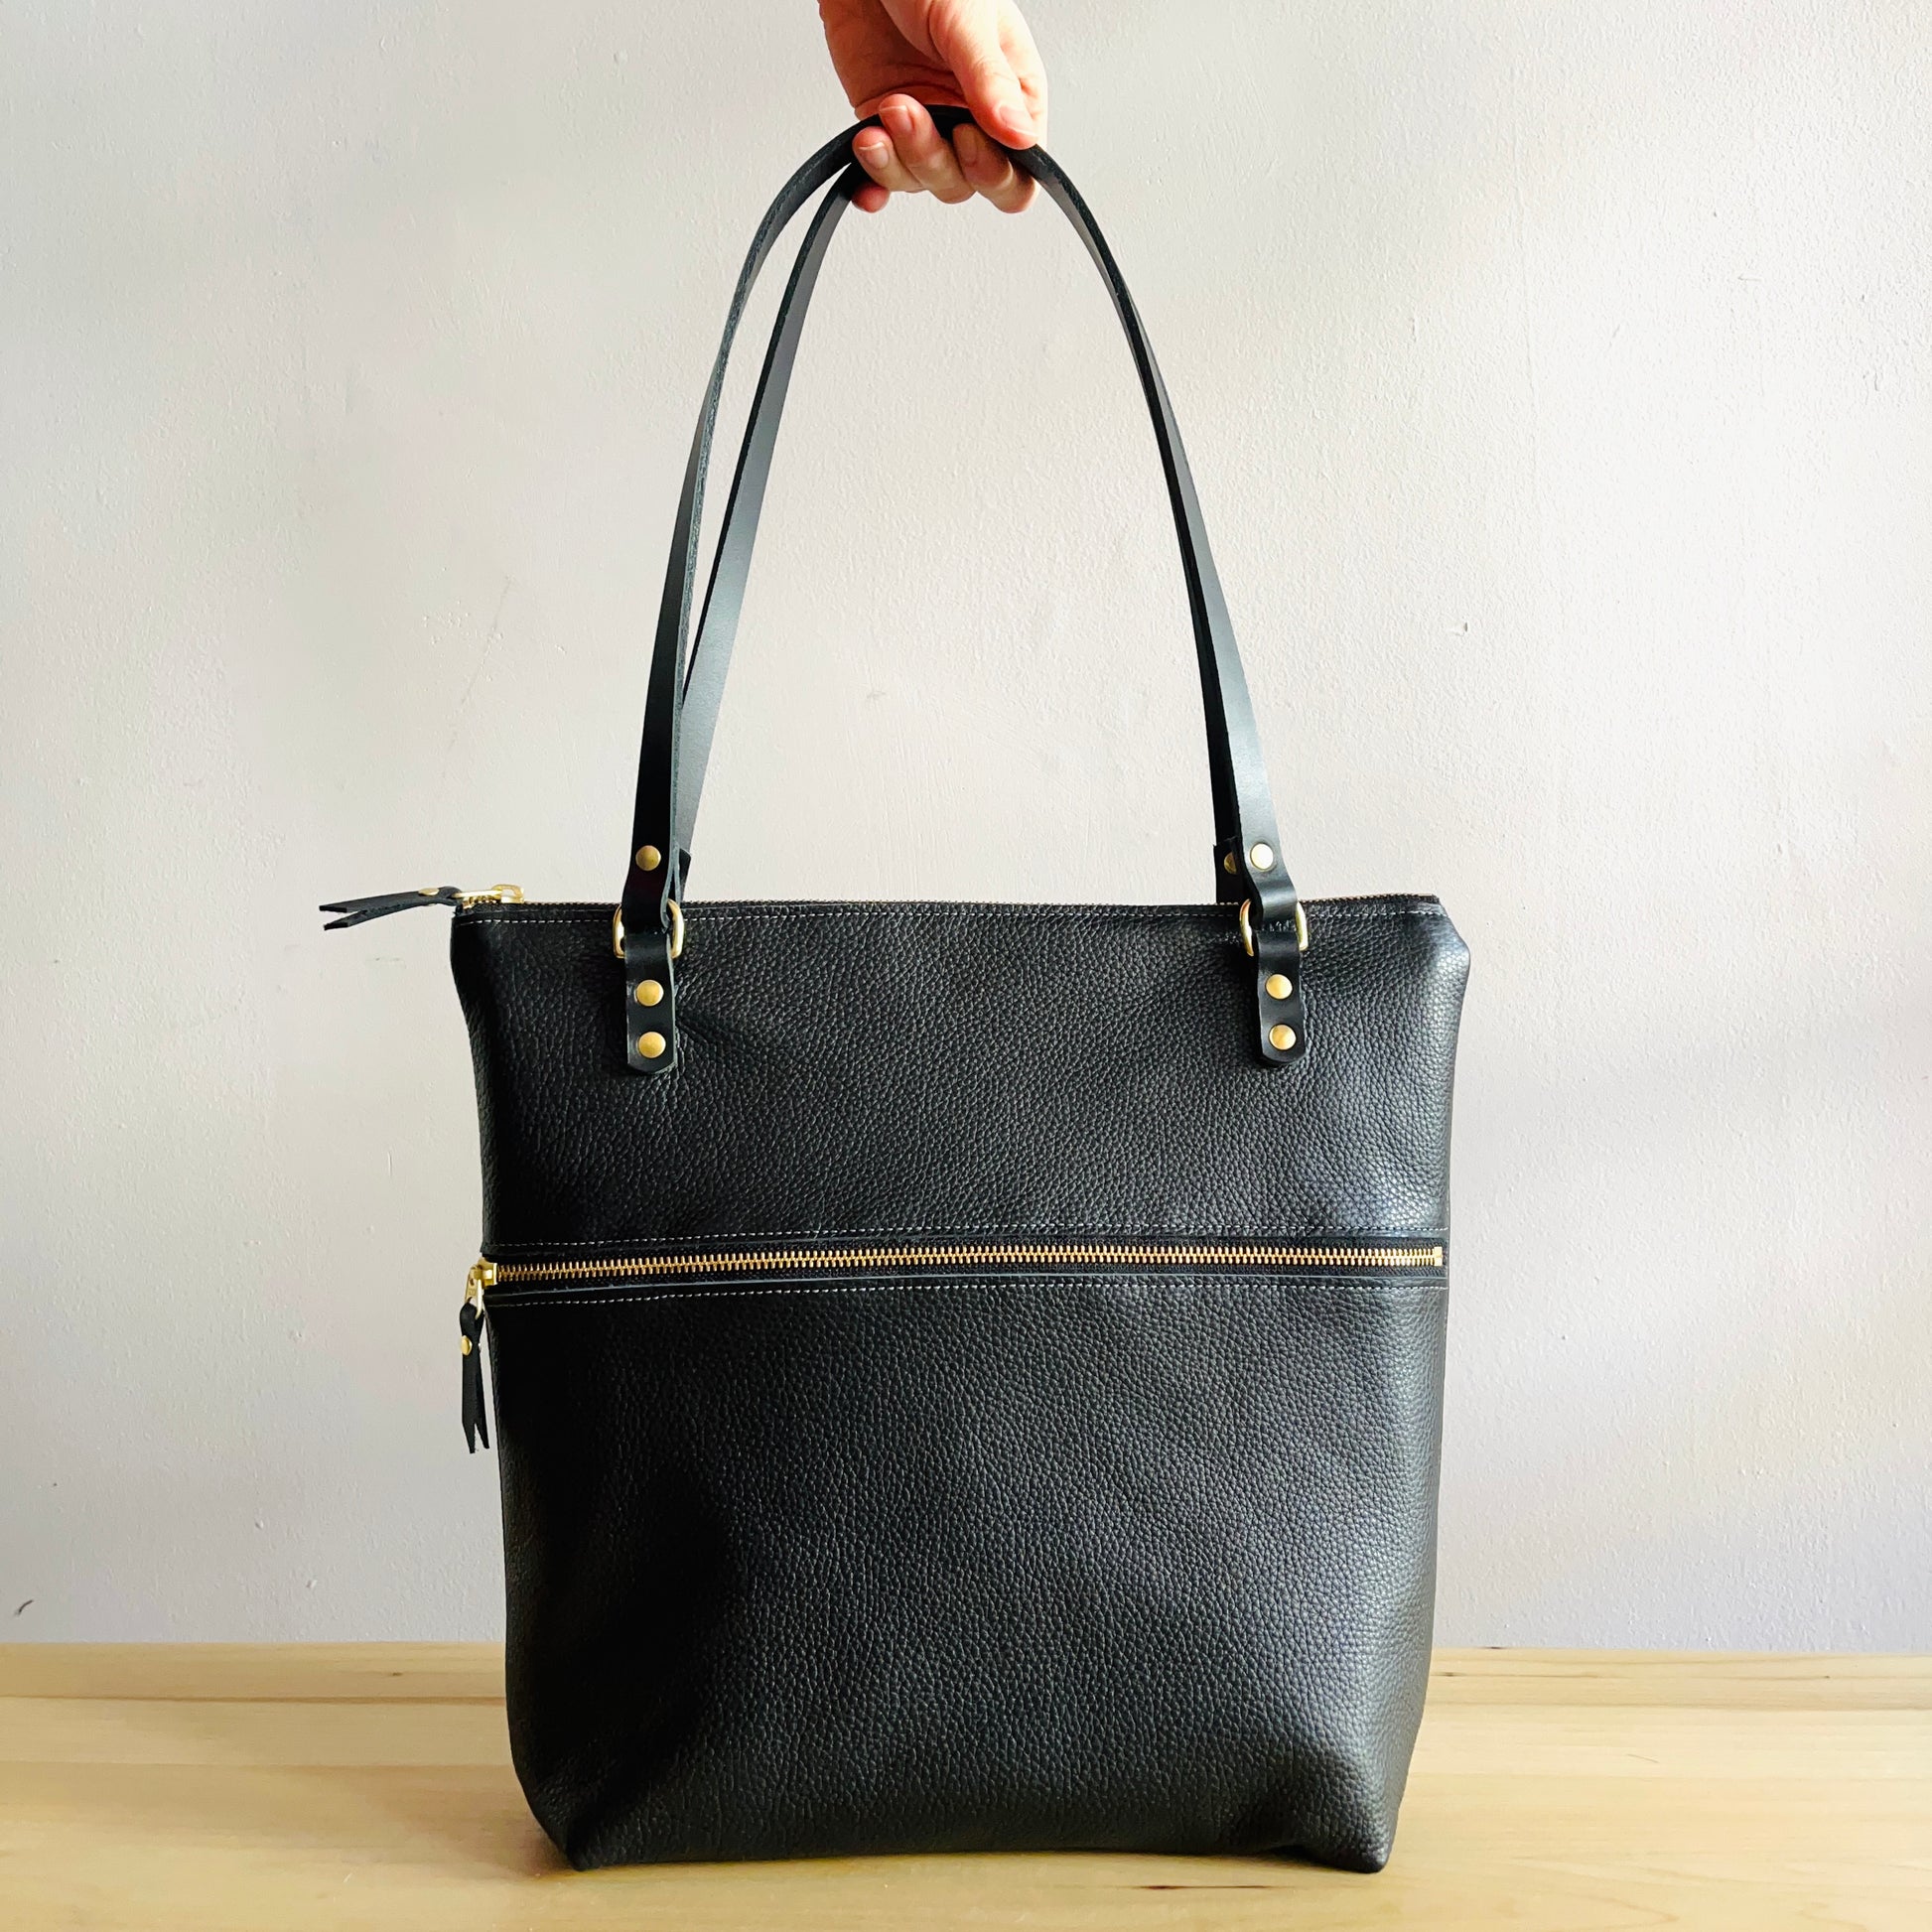 Black leather shoulder bag with zippers by Suzanne Faris